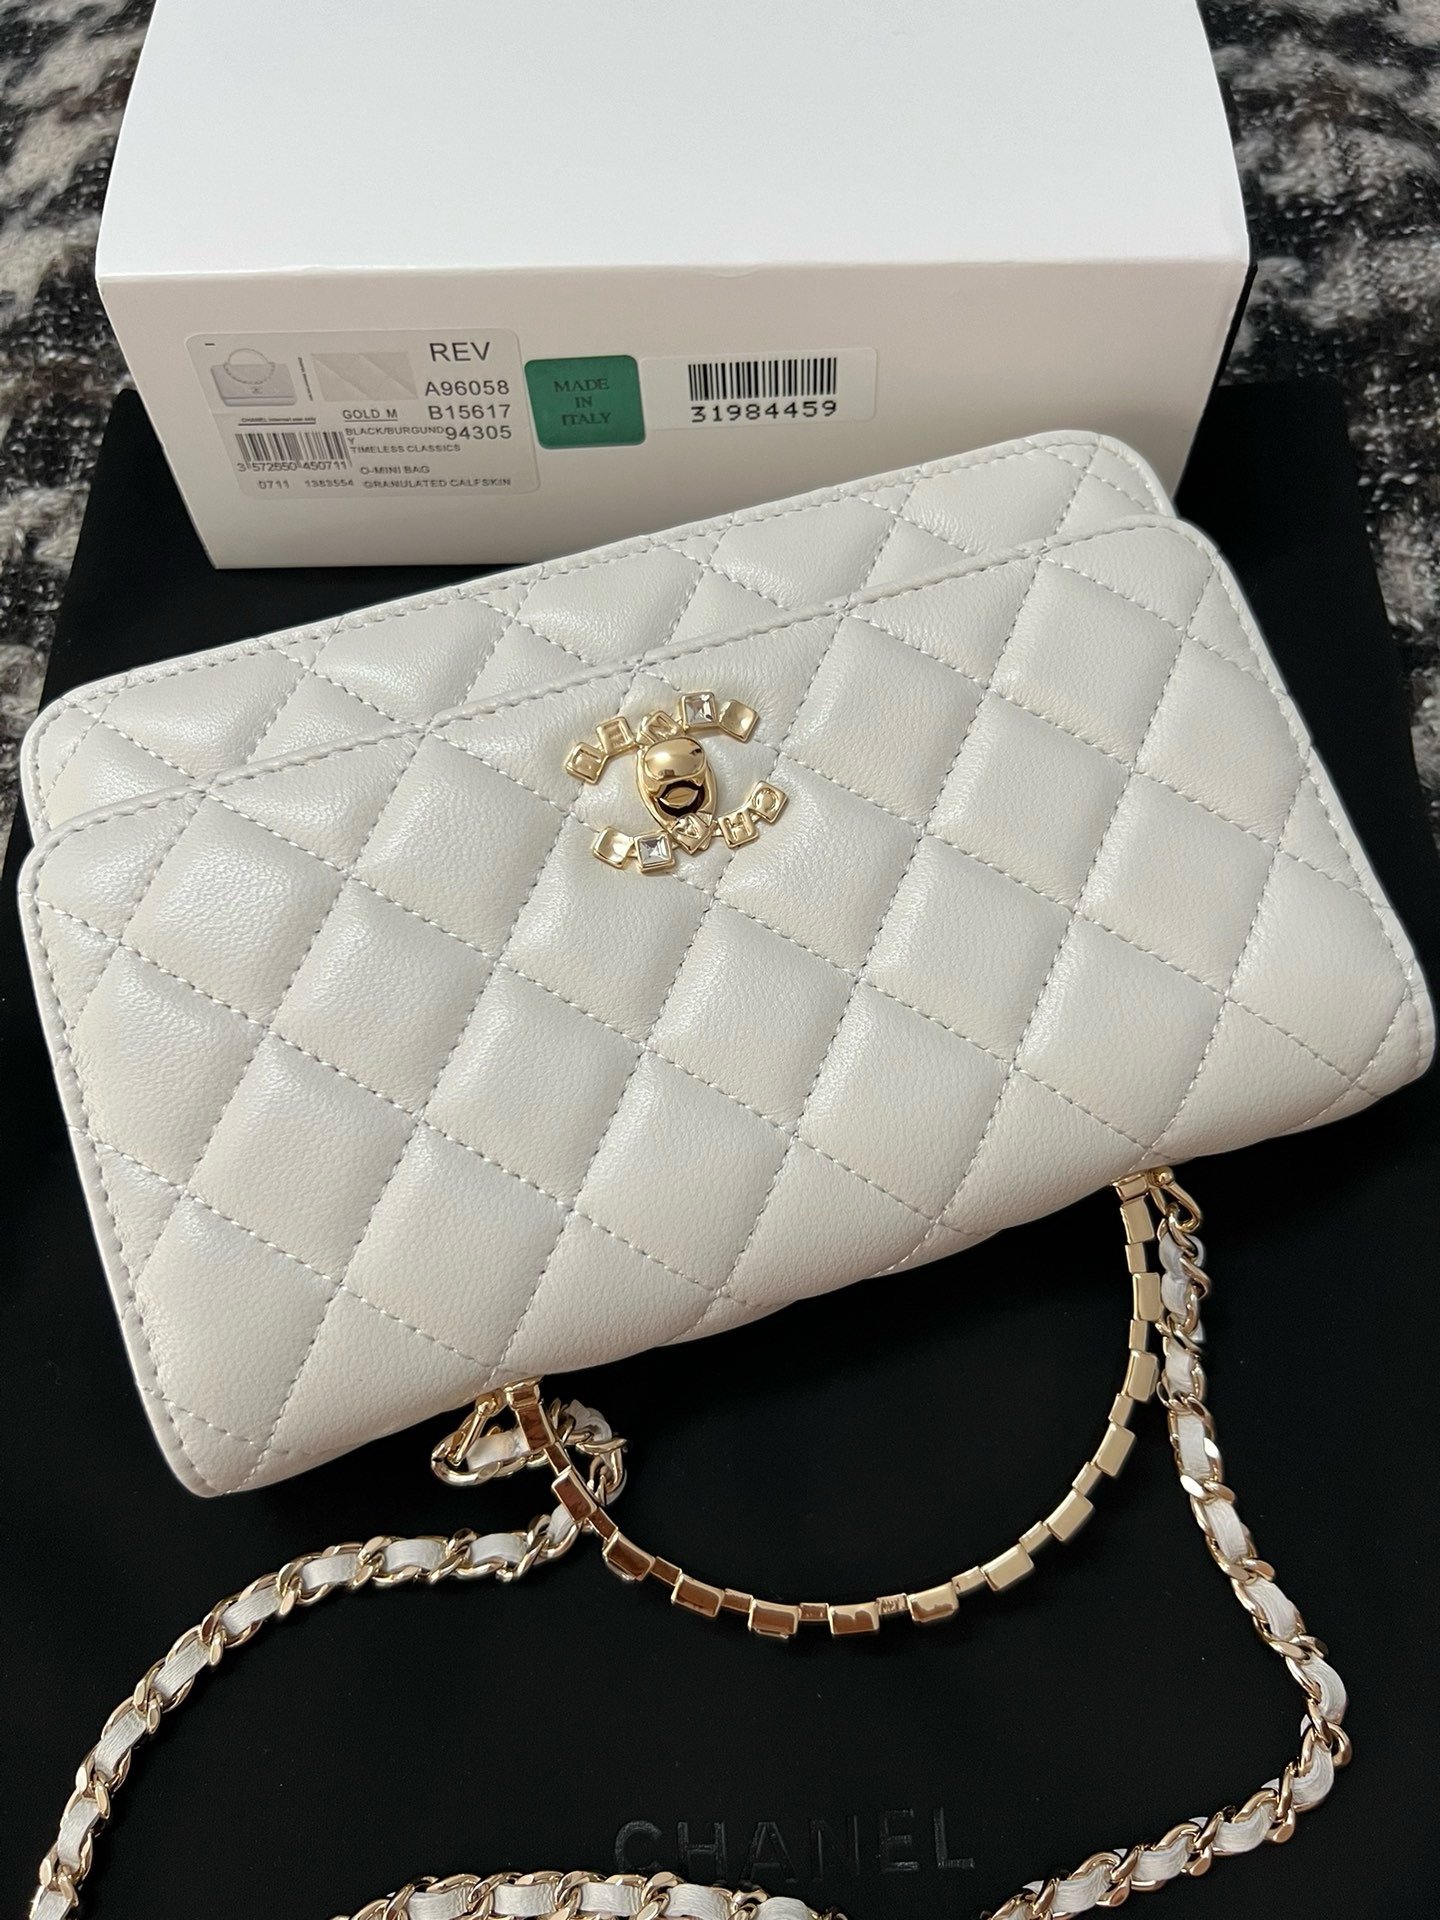 CHANEL FLAP PHONE HOLDER WITH CHAIN AB3566 white